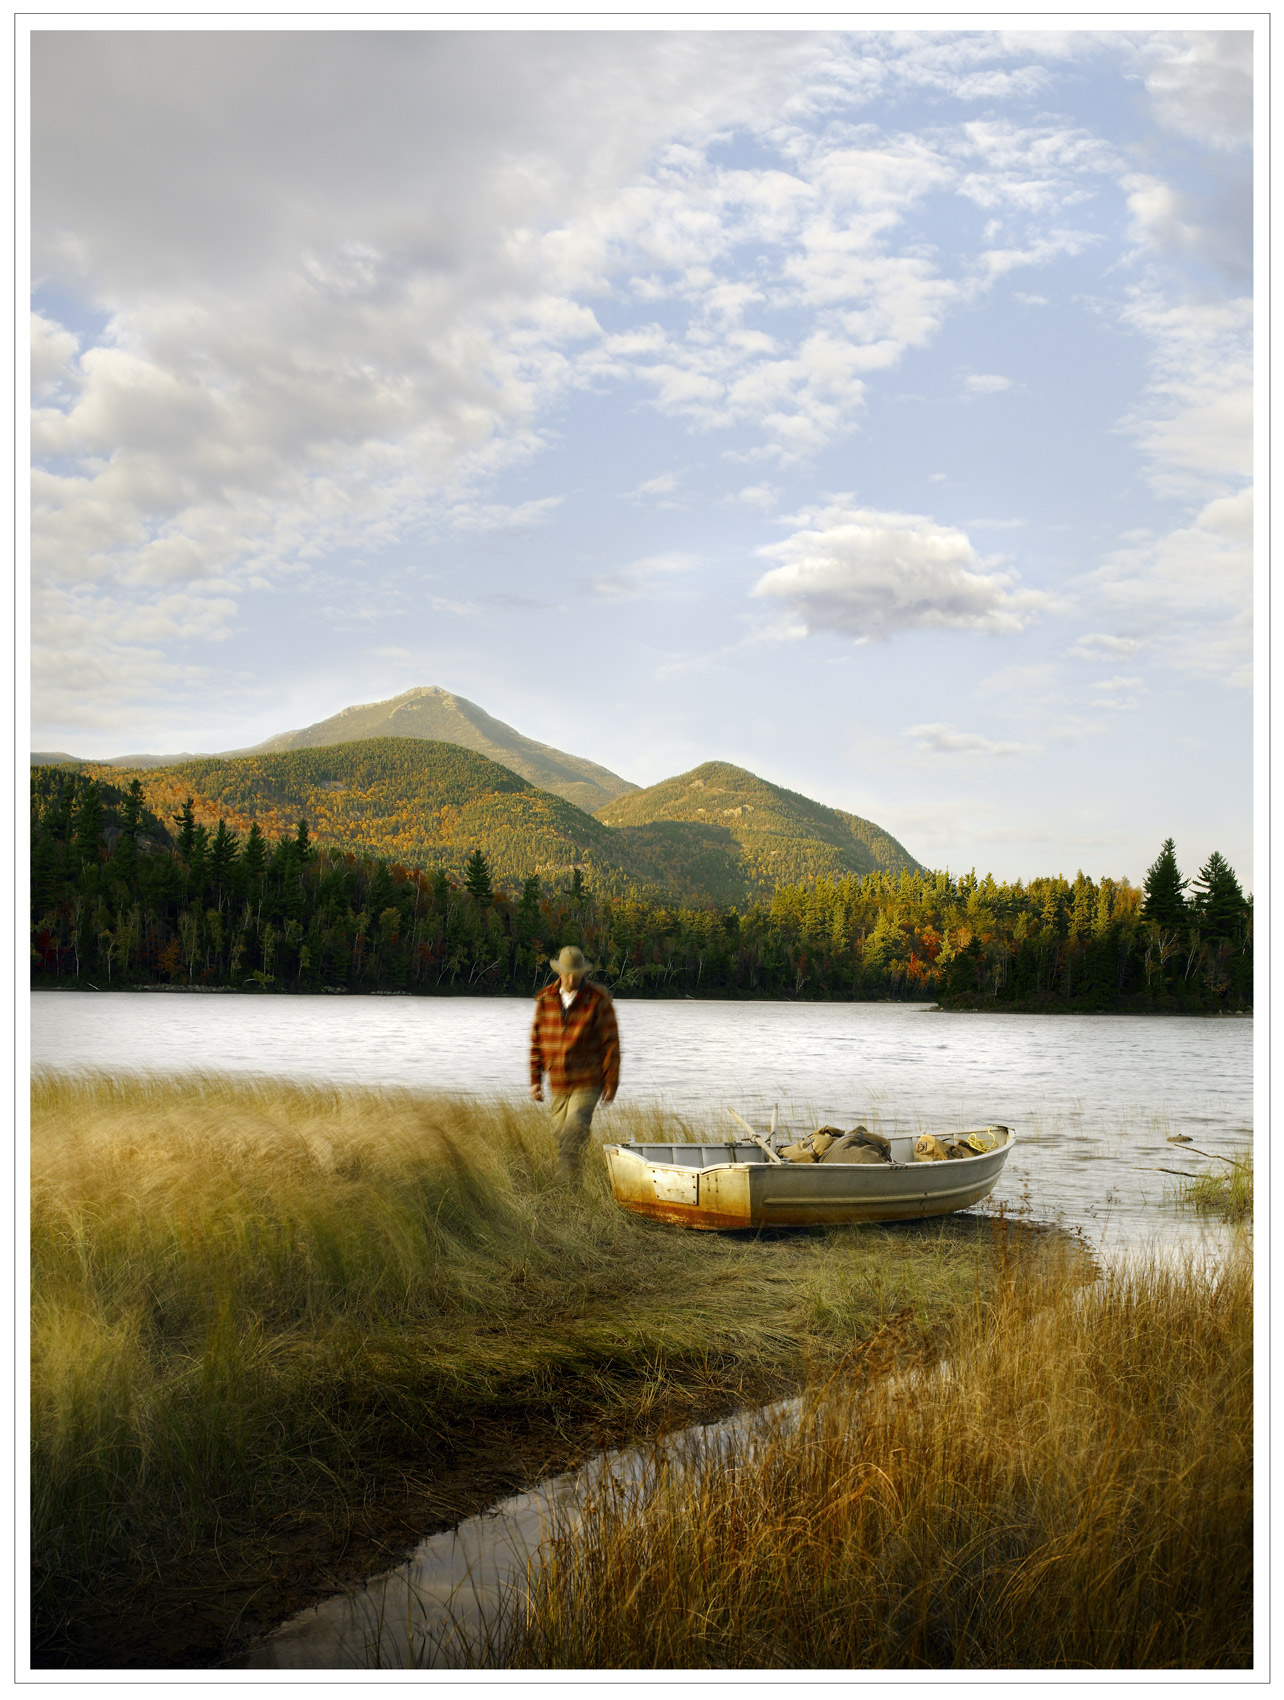 Man standing next to a rowboat in a lake - print campaign for CSX Corporation